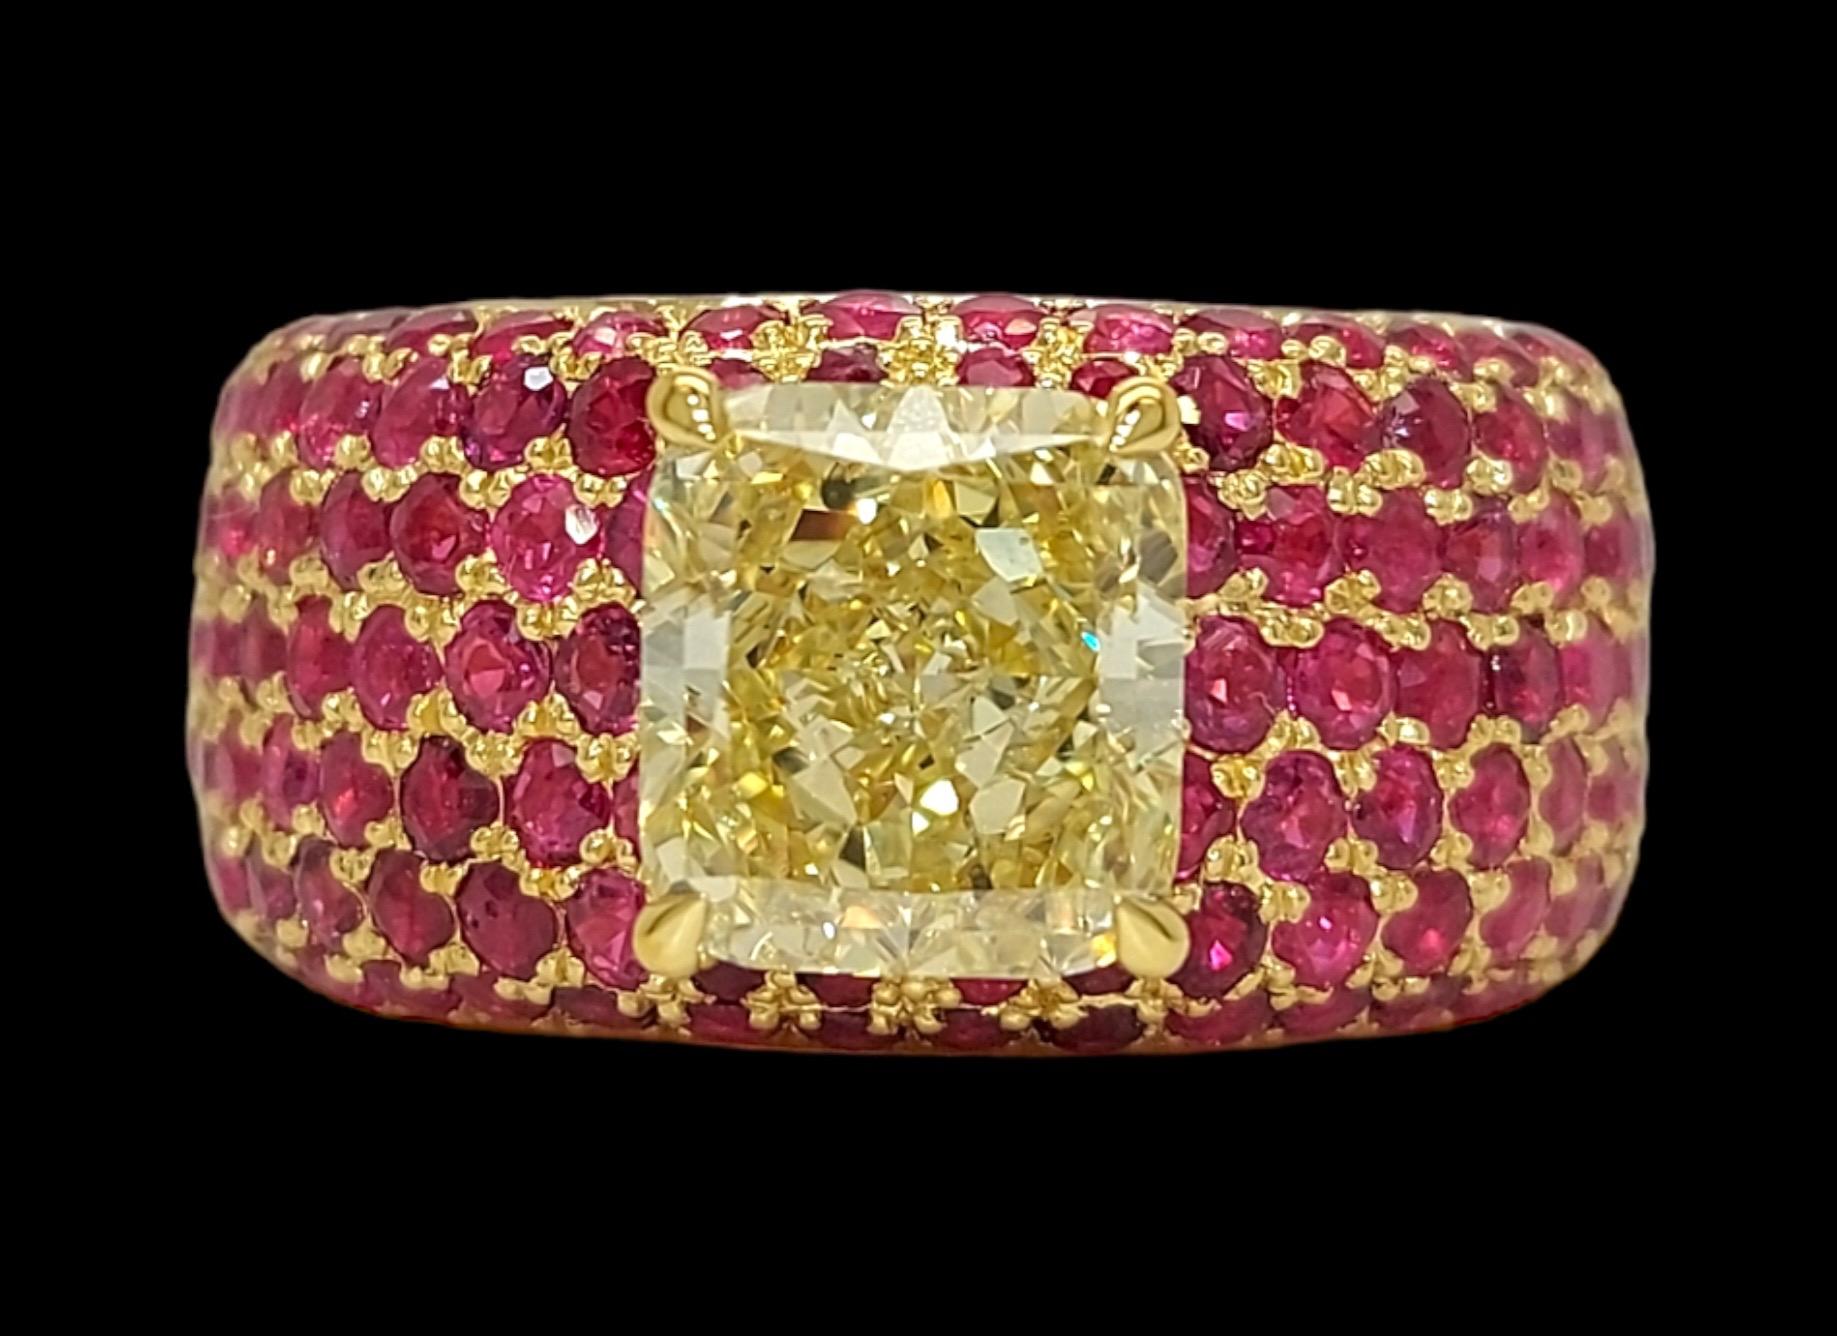 18 Kt. Yellow Gold Ring 3.06 Ct Fancy Yellow Diamond & Ruby

Completely Hand Crafted in Our Atelier, As seen on the last photograph there is also an option of having this ring with red Ceramic coating !

Diamond: Fancy yellow, natural diamond,